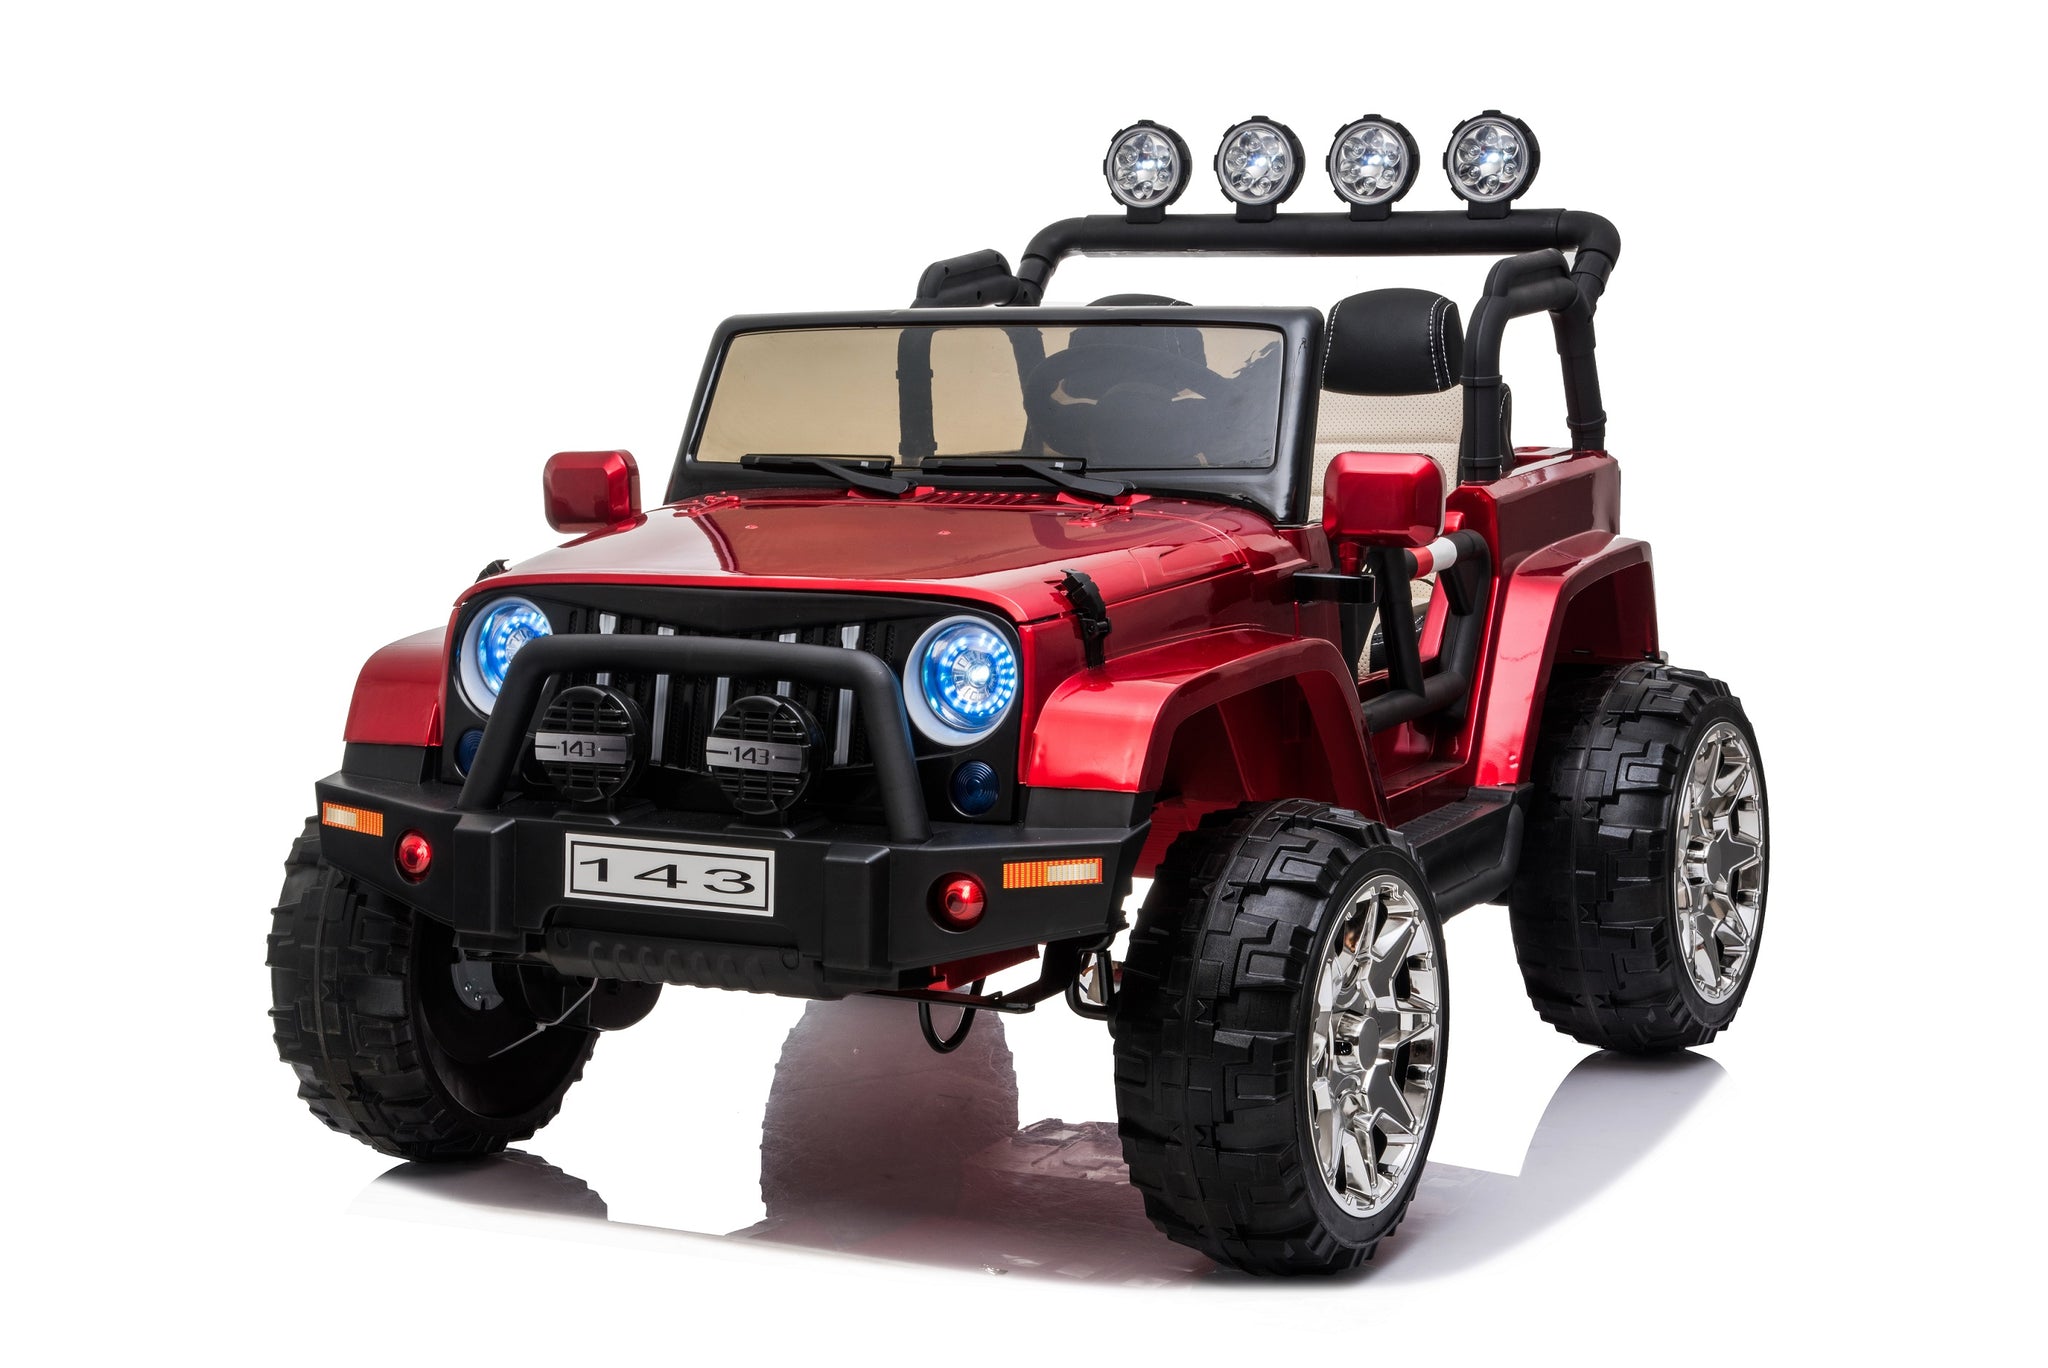 Rubber Tires Fully Loaded 2 Seater 4x4 Electric Ride on Jeep Style 24